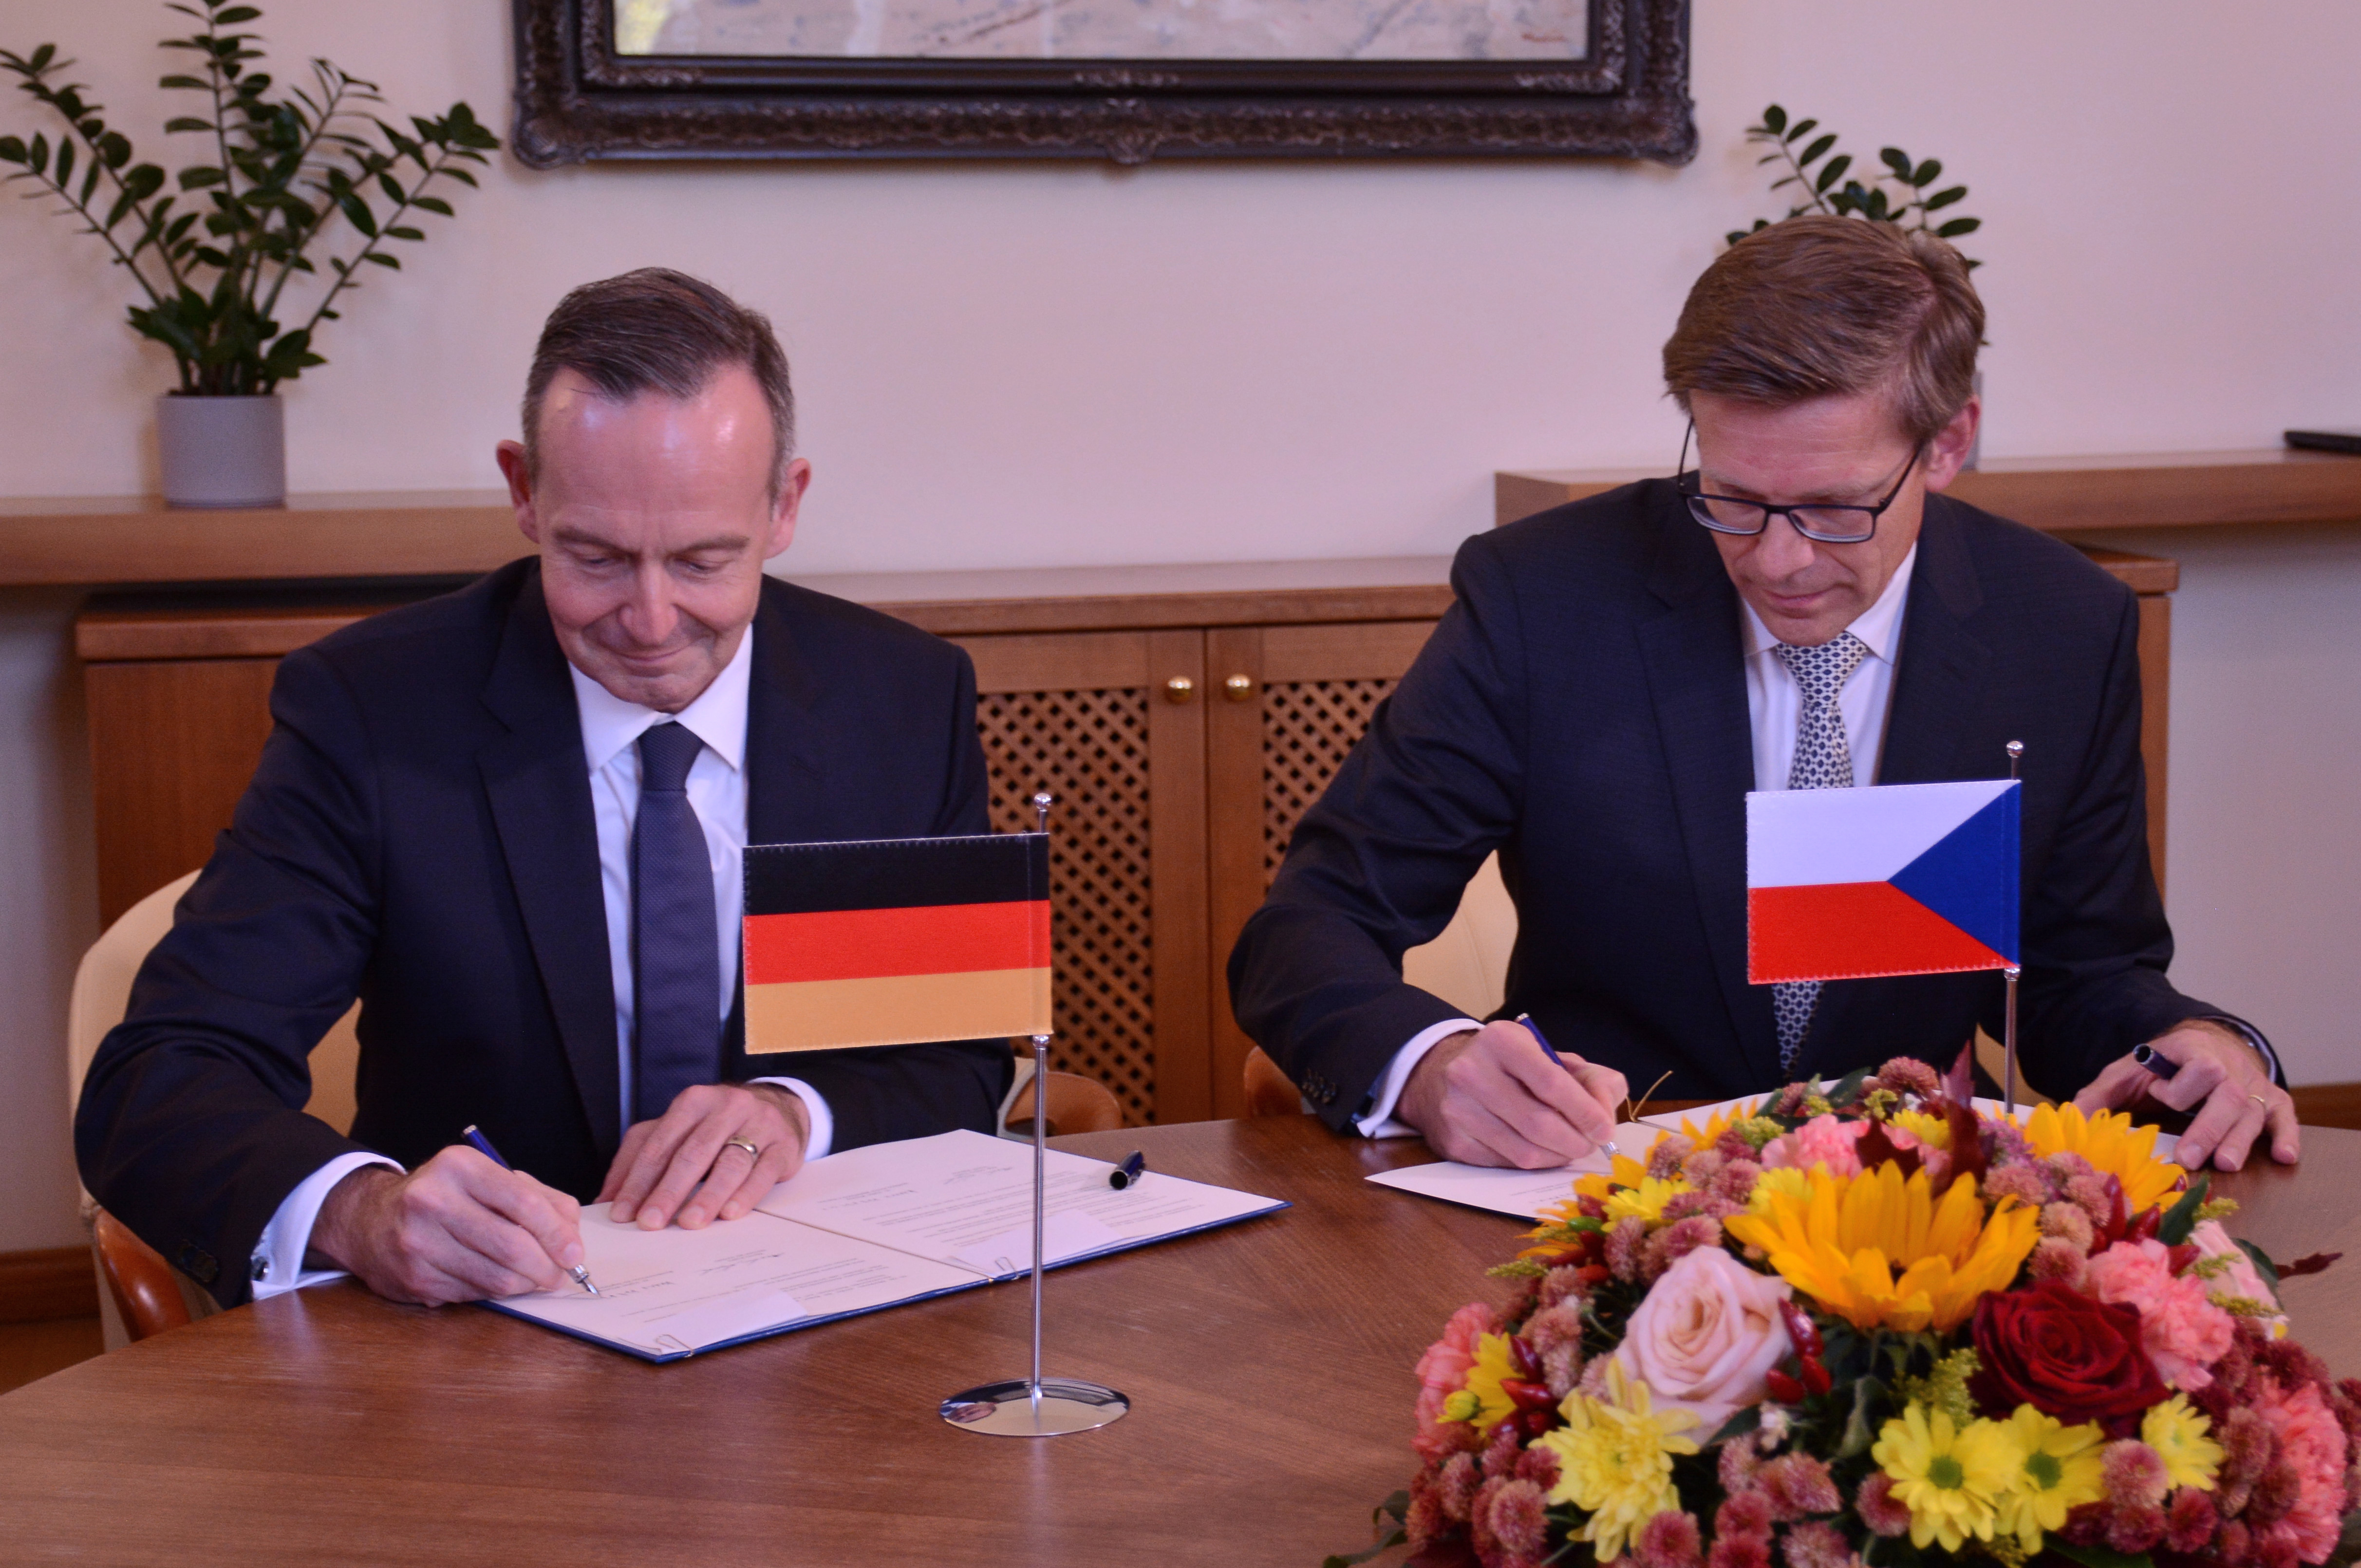 The railway connection between the Czech Republic and Germany will improve